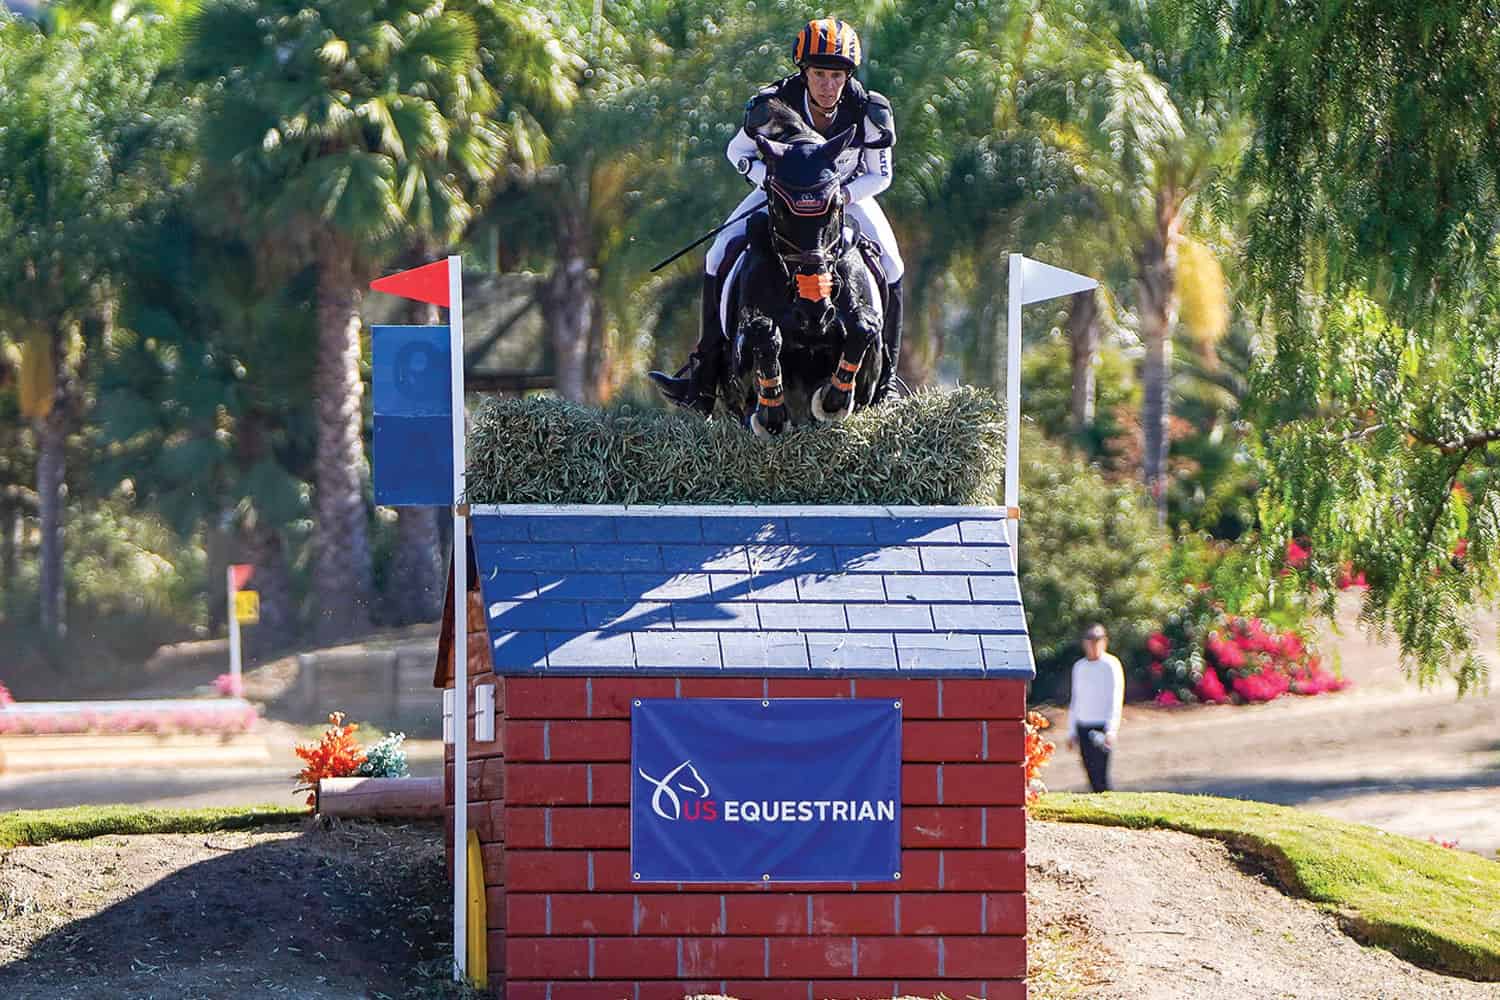 Liz Halliday and Cooley Nutcracker win in the 2023 USEF National CCI4*-L at the Eventing Championships at Galway Downs in Temecula, California